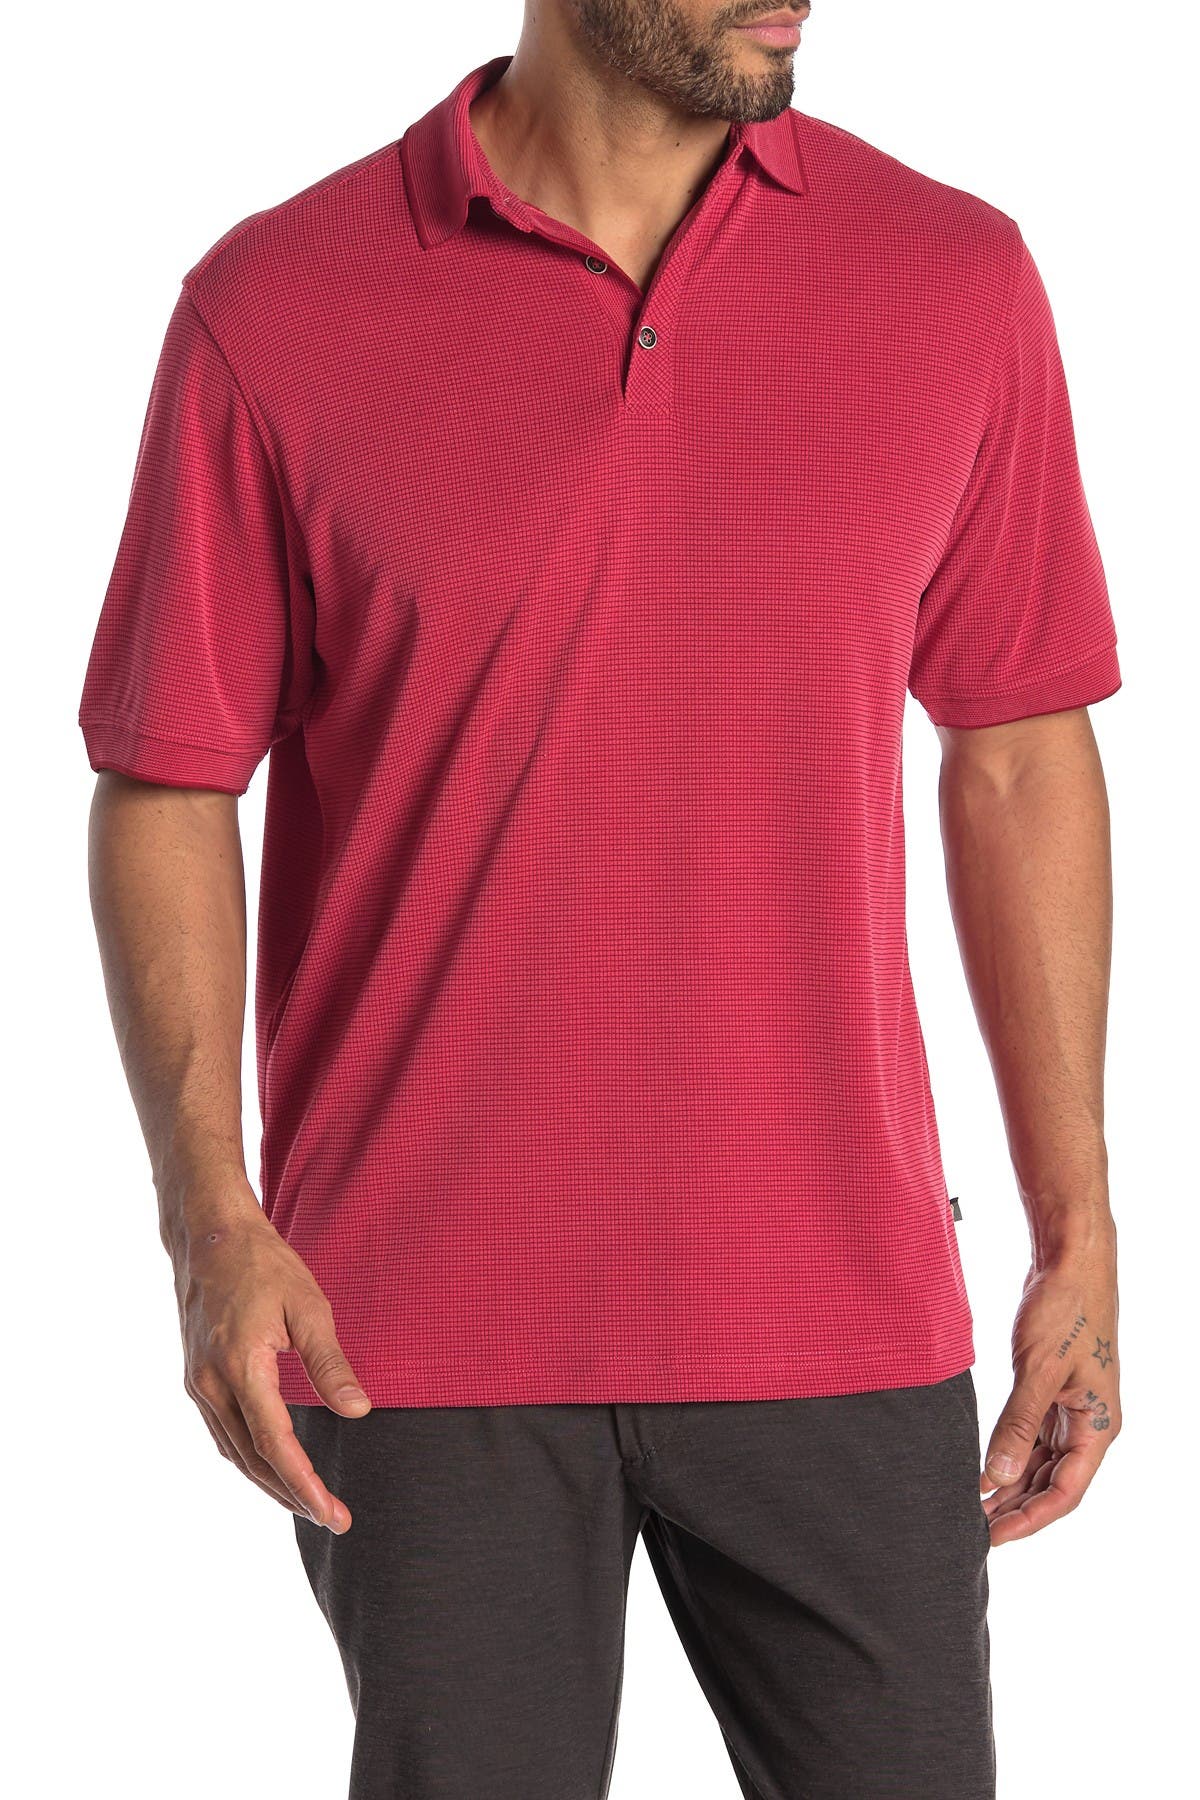 Tommy Bahama | All Square Core Polo 